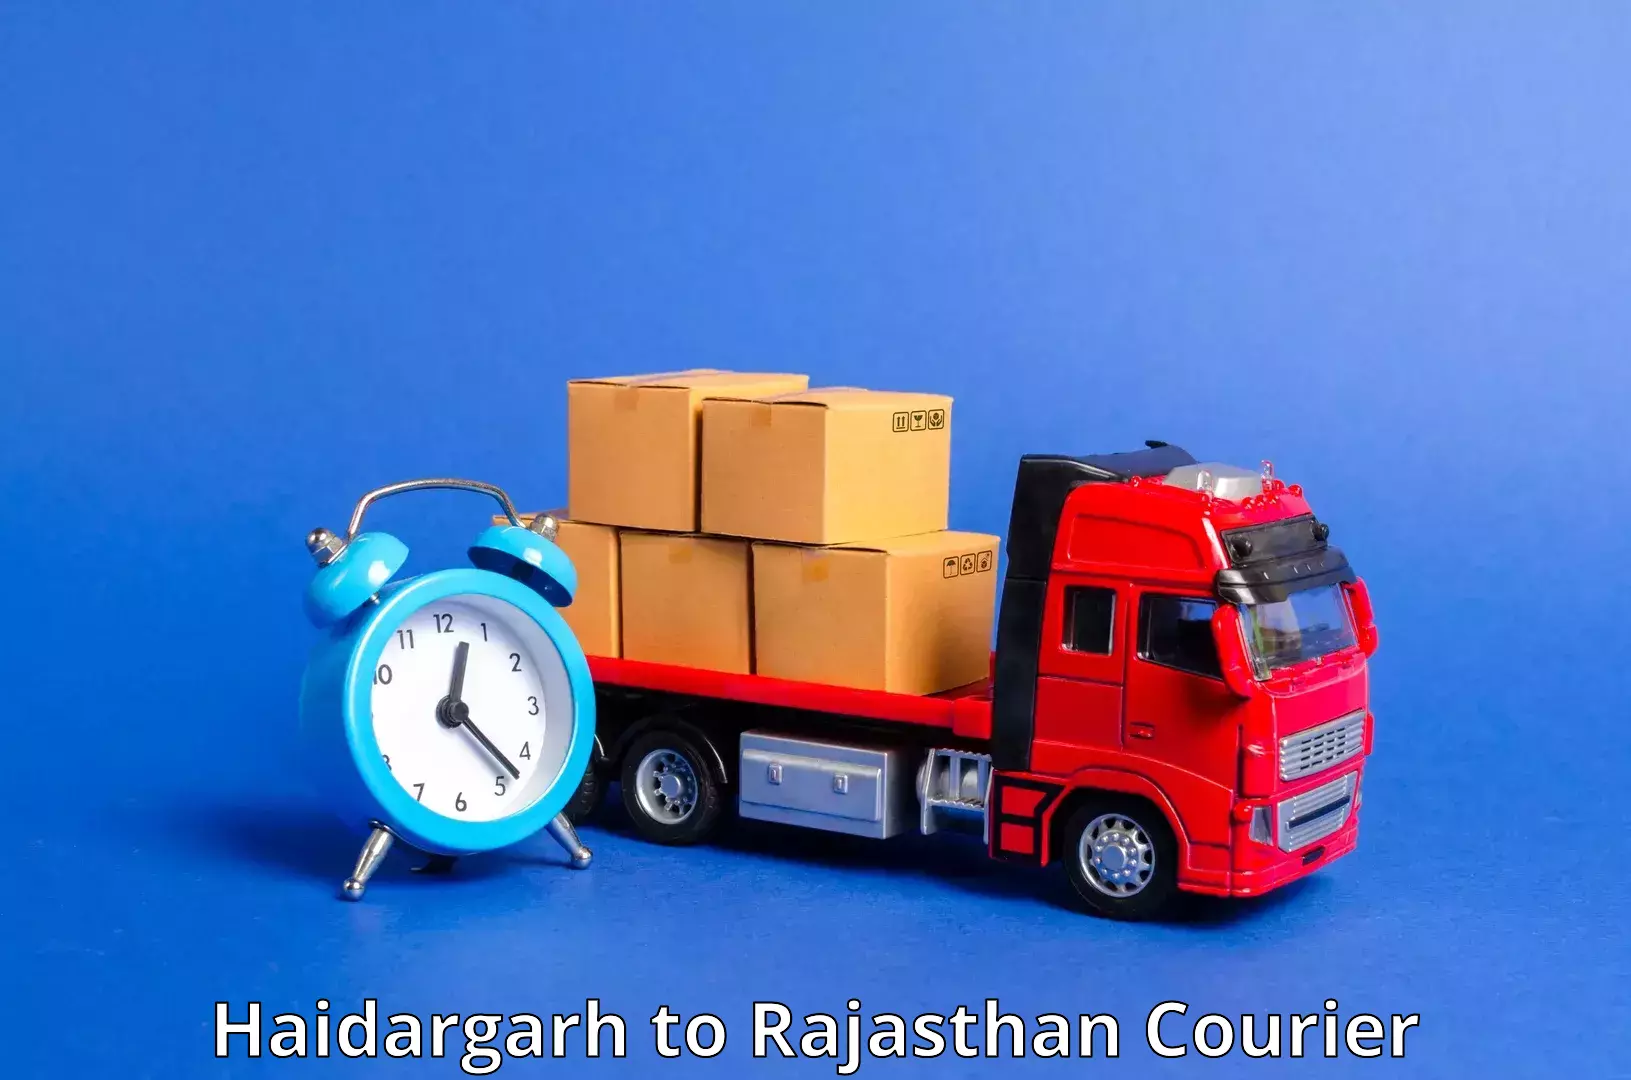 Affordable parcel service Haidargarh to Rupbas